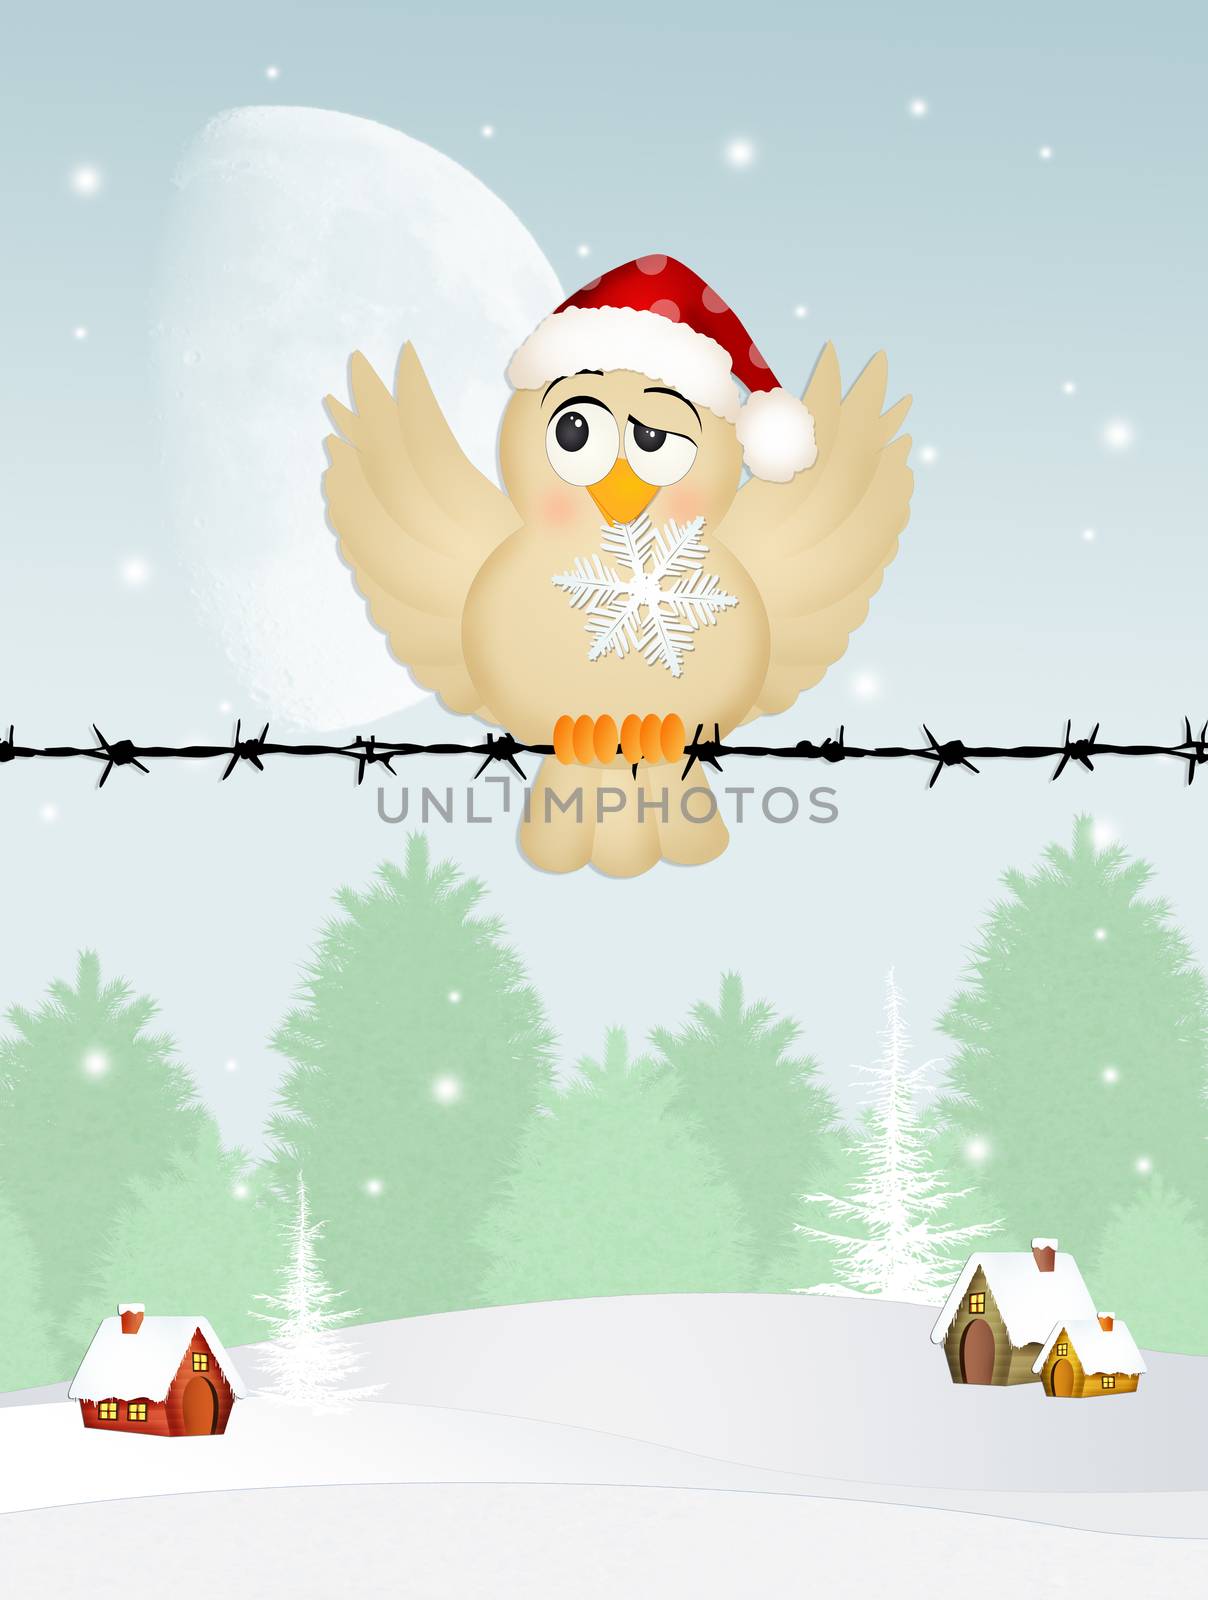 illustration of bird with snowflake in winter